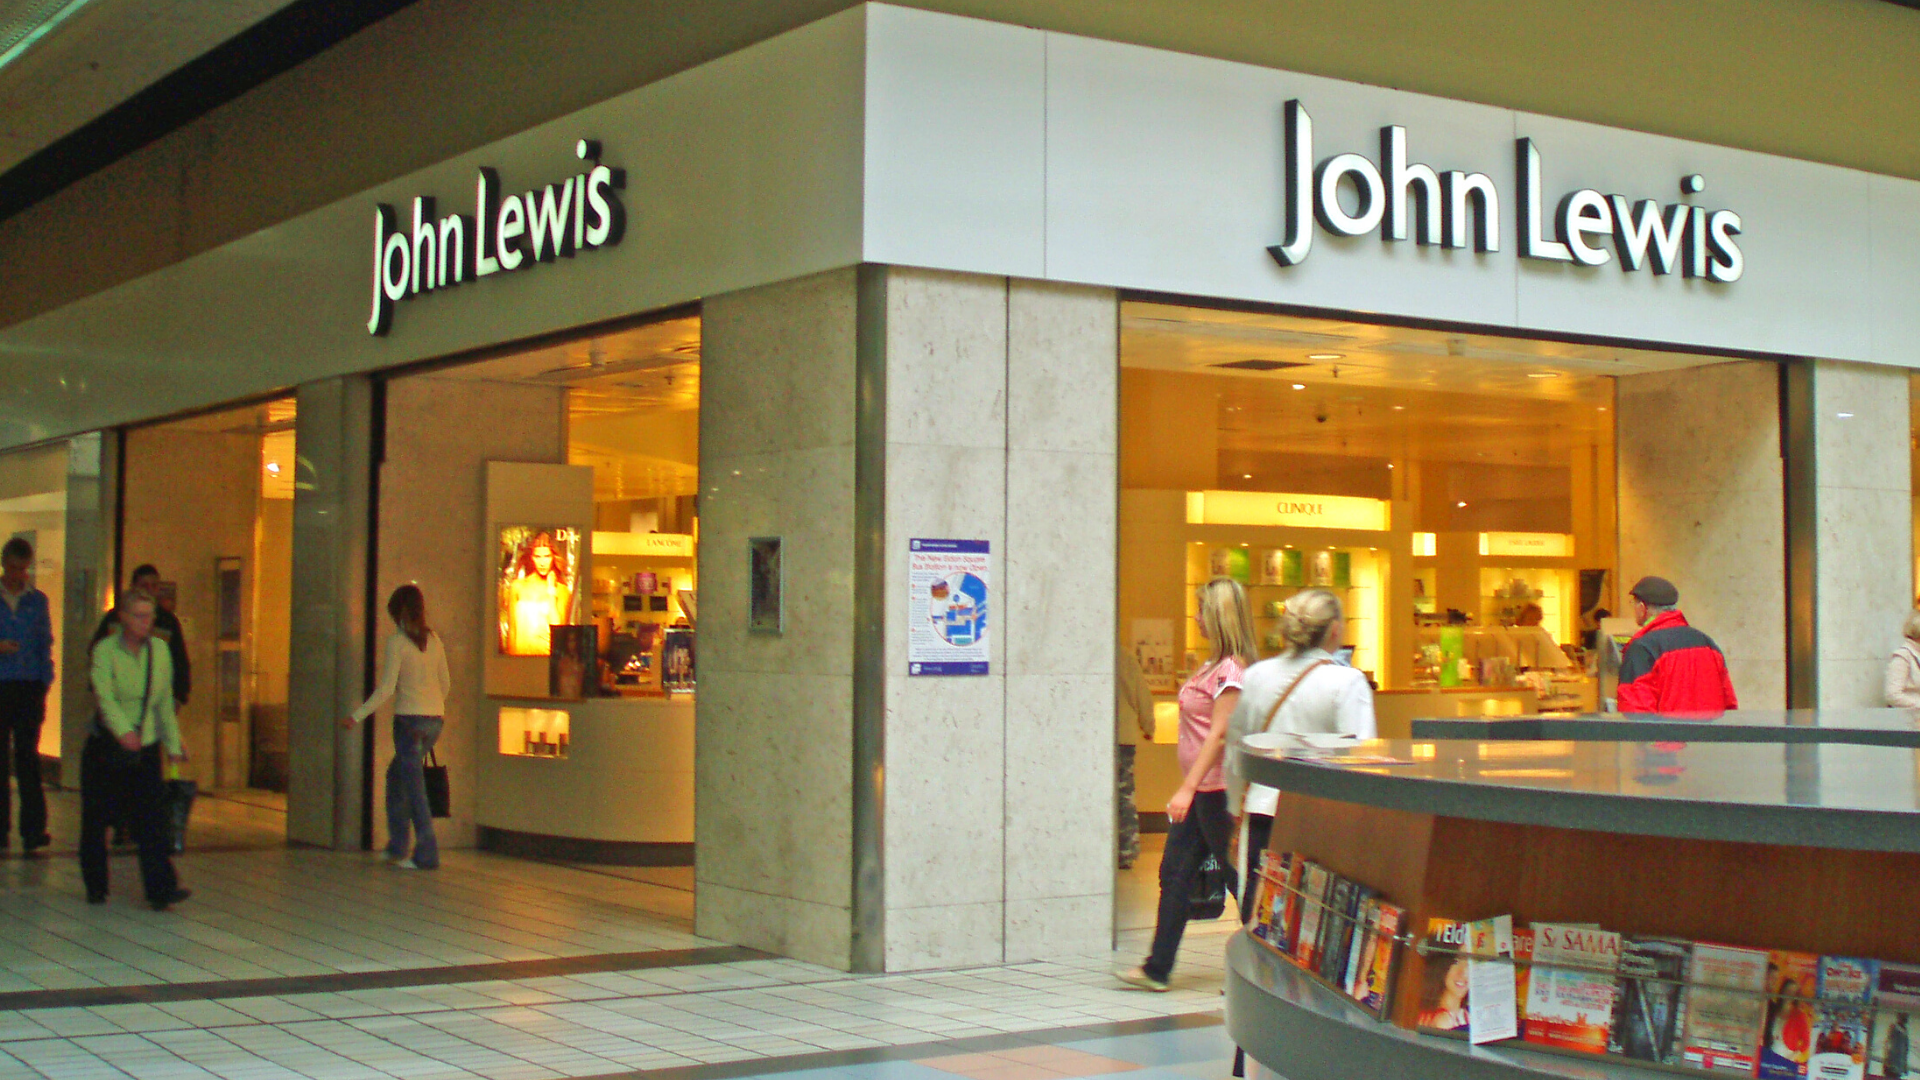 John Lewis is aiming to provide affordable housing. Image credit: Mankind 2k / Wikimedia Commons